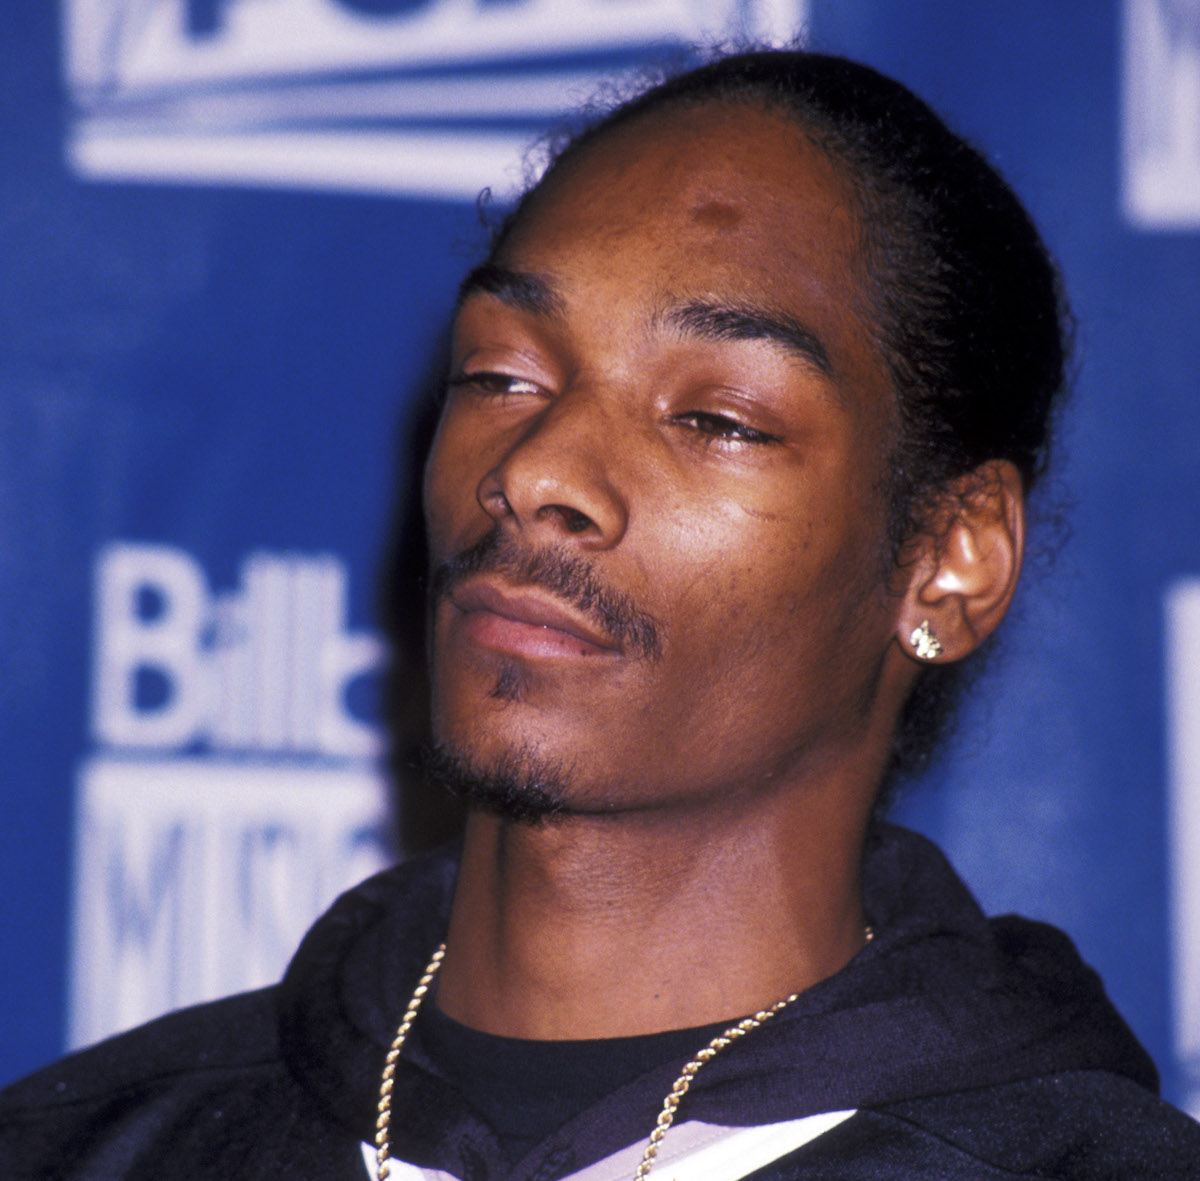 Snoop Dogg poses on red carpet for the 1993 Billboard Music Awards